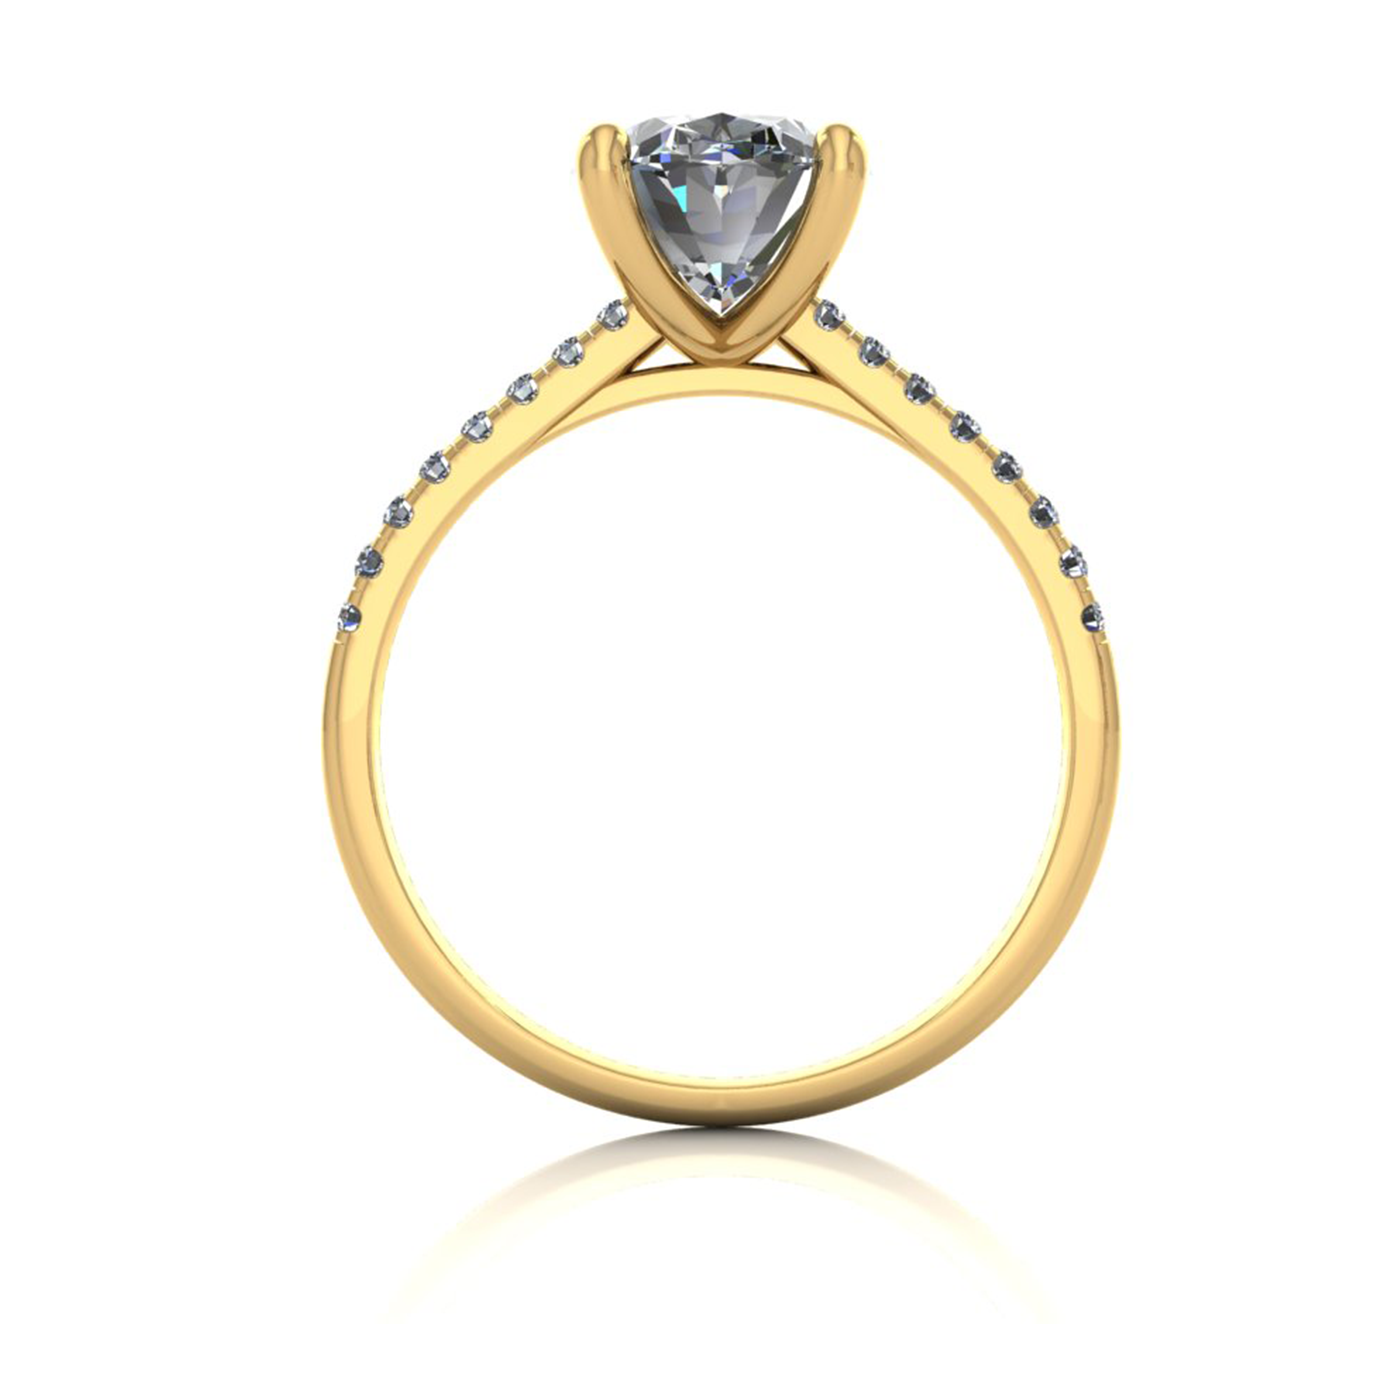 18k yellow gold  2,00 ct 4 prongs oval cut diamond engagement ring with whisper thin pavÉ set band